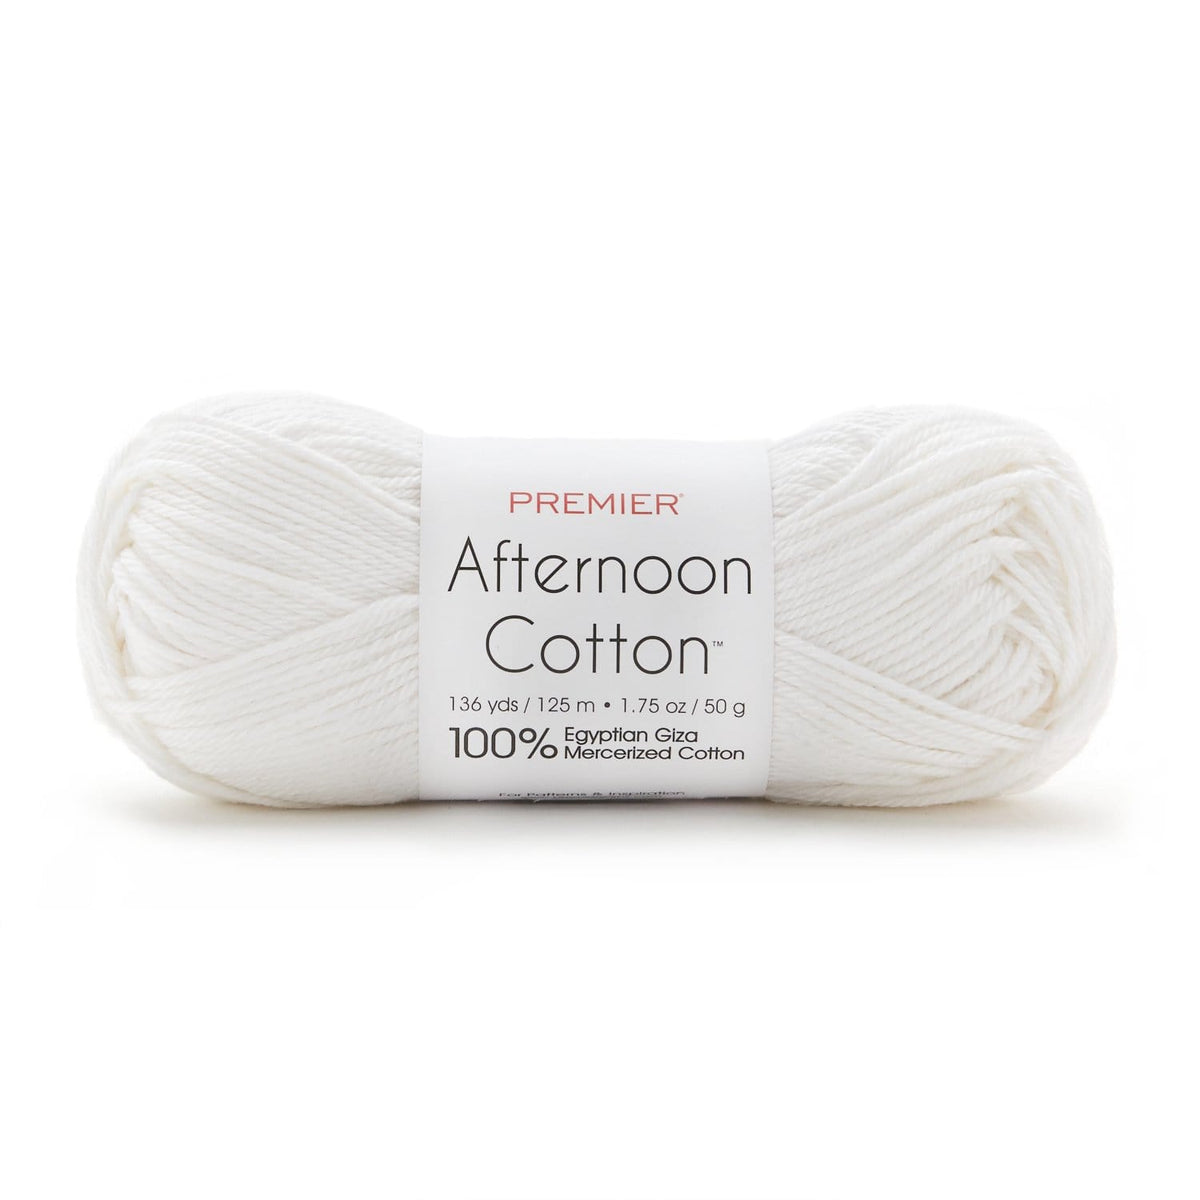 https://www.shoppremieryarns.shop/wp-content/uploads/1692/74/our-clearance-offers-a-great-option-to-save-money-while-also-get-premier-afternoon-cotton-mercerized-premier-yarns_7.jpg